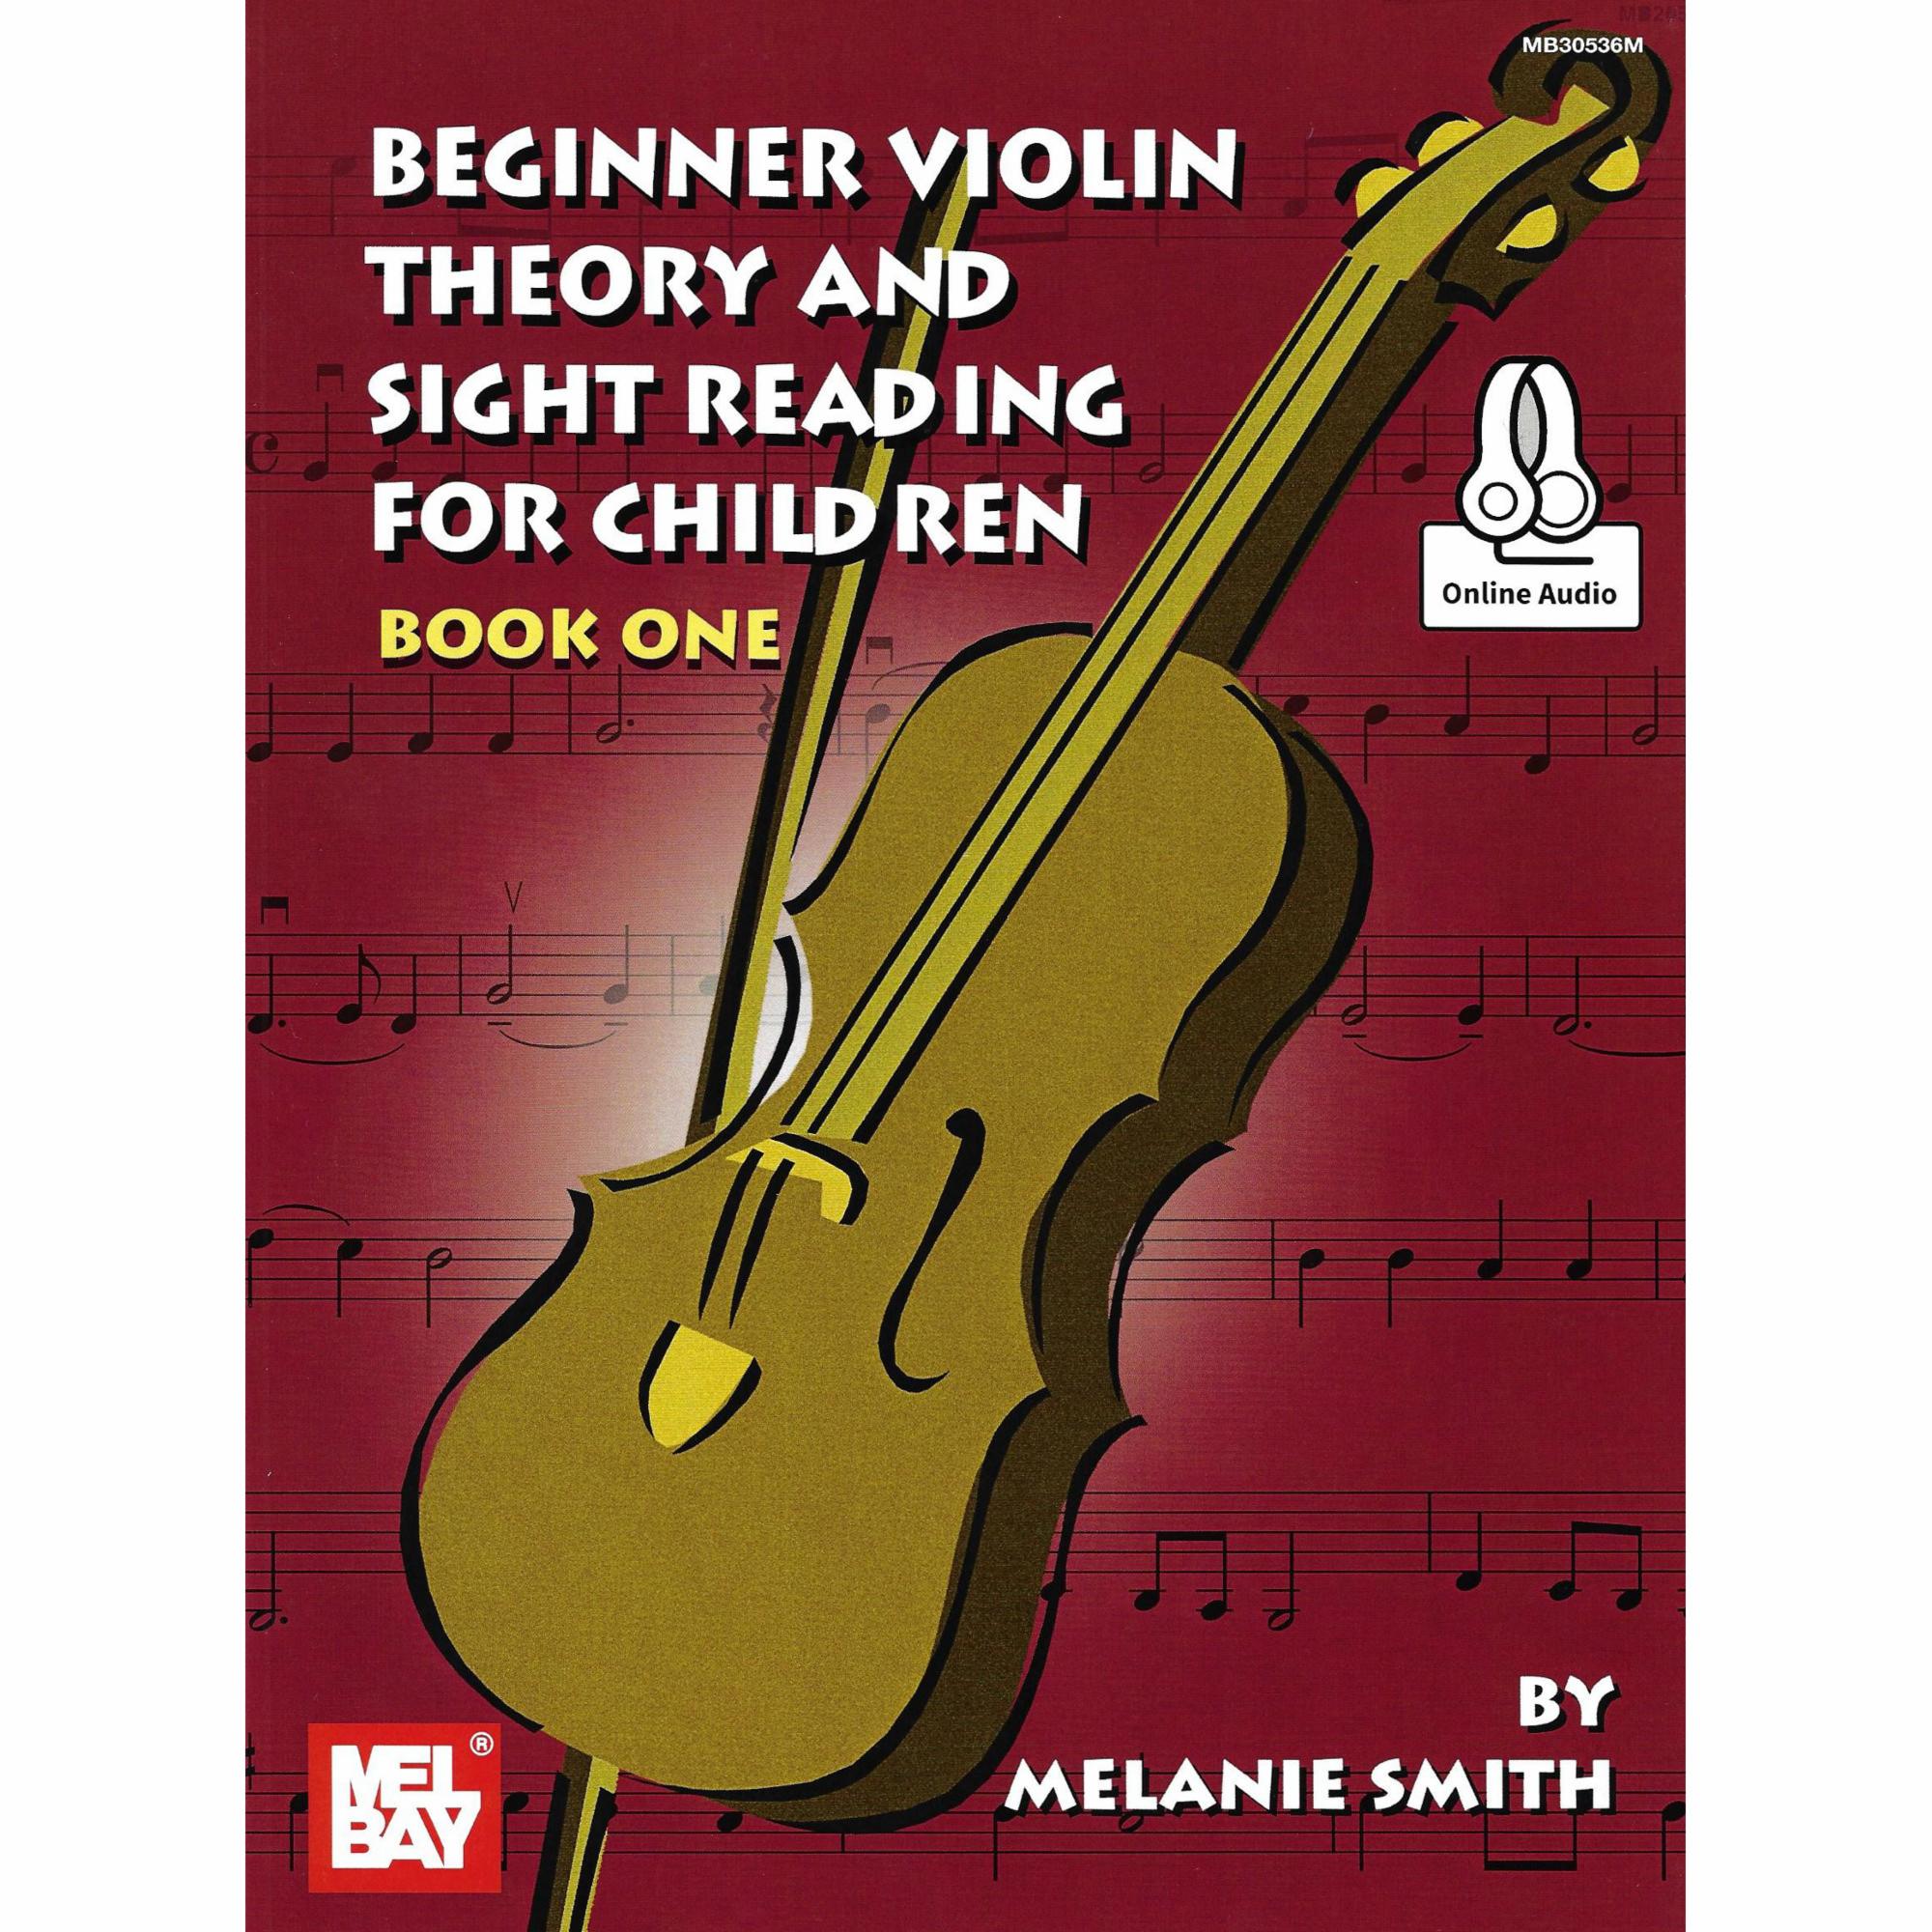 Beginner Violin Theory and Sight Reading for Children